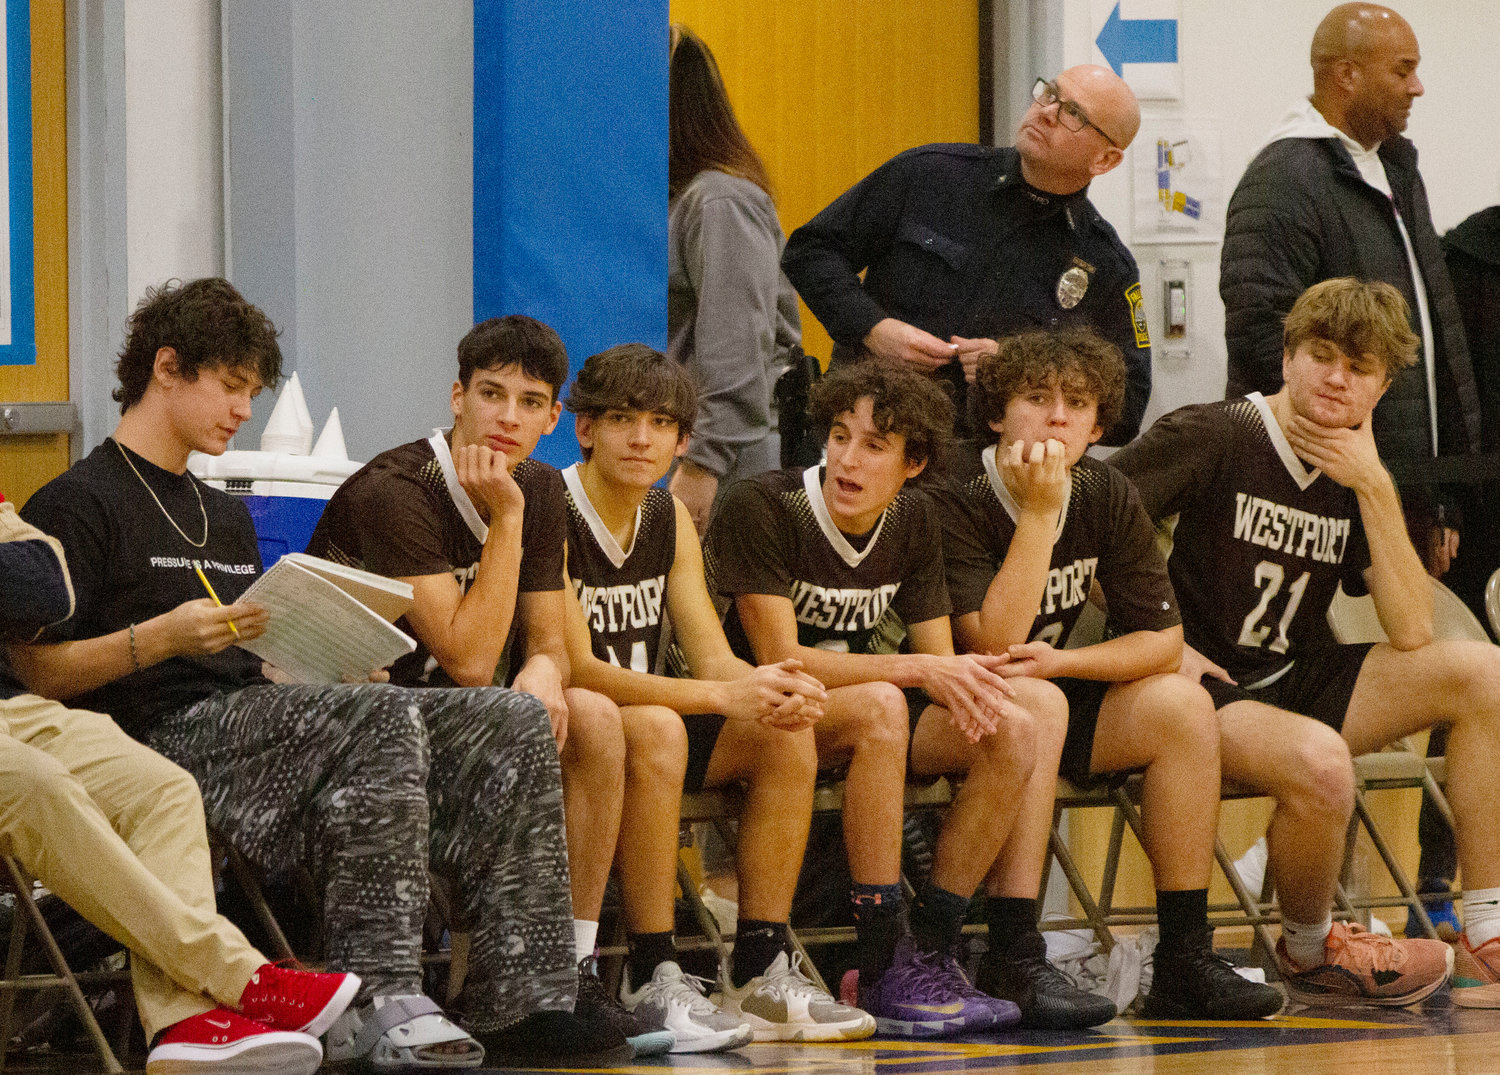 Injured Owen Friedrichson (left) keeps stats on the bench, with Owen Boudria, Ben Boudria, Chris Duarte and others.